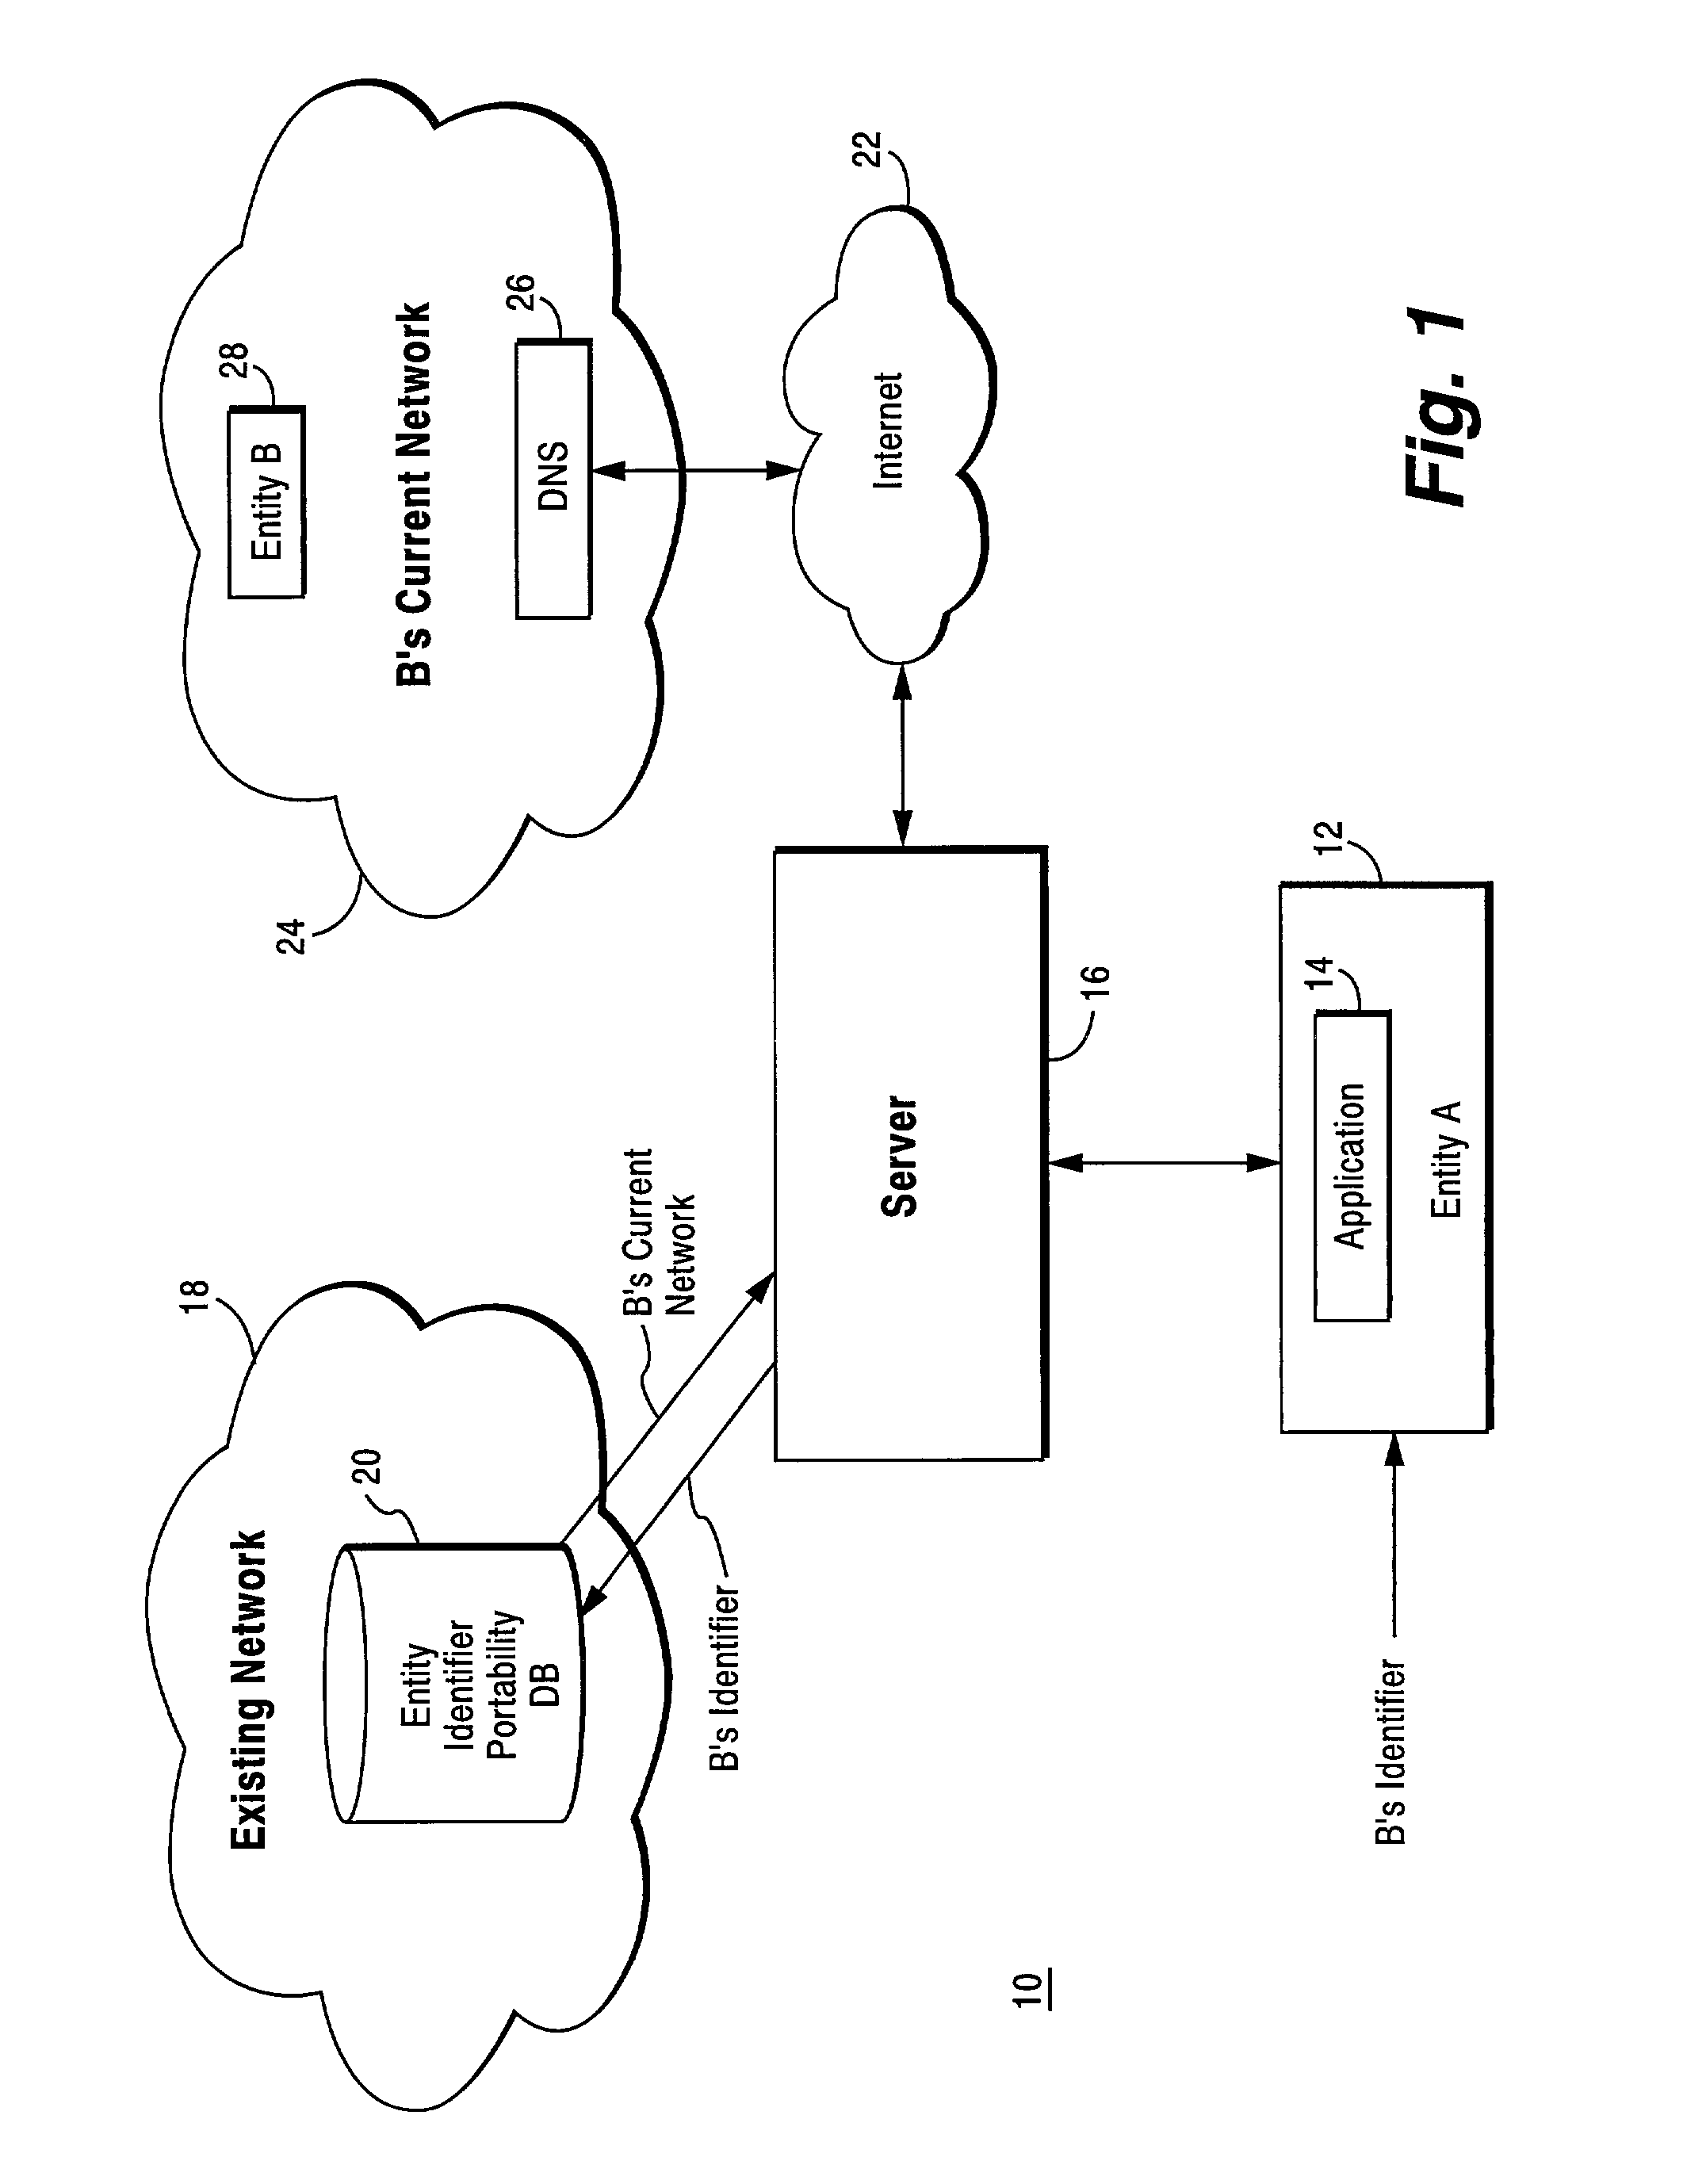 Method and apparatus for resolving an entity identifier into an internet address using a domain name system (DNS) server and an entity identifier portability database